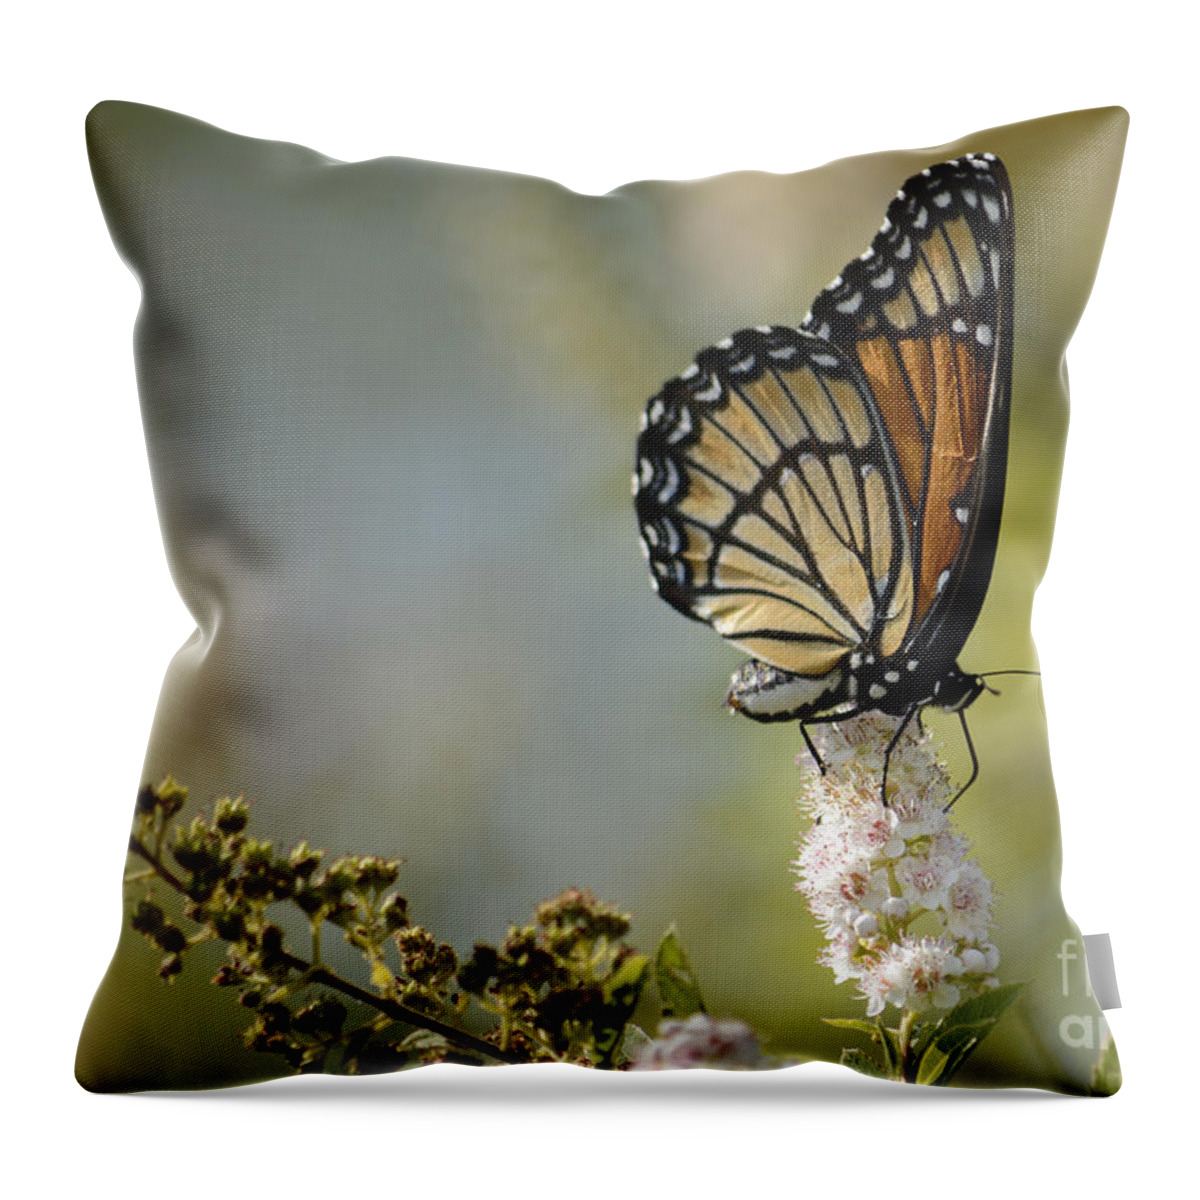 High Virginia Images Throw Pillow featuring the photograph Viceroy by Randy Bodkins